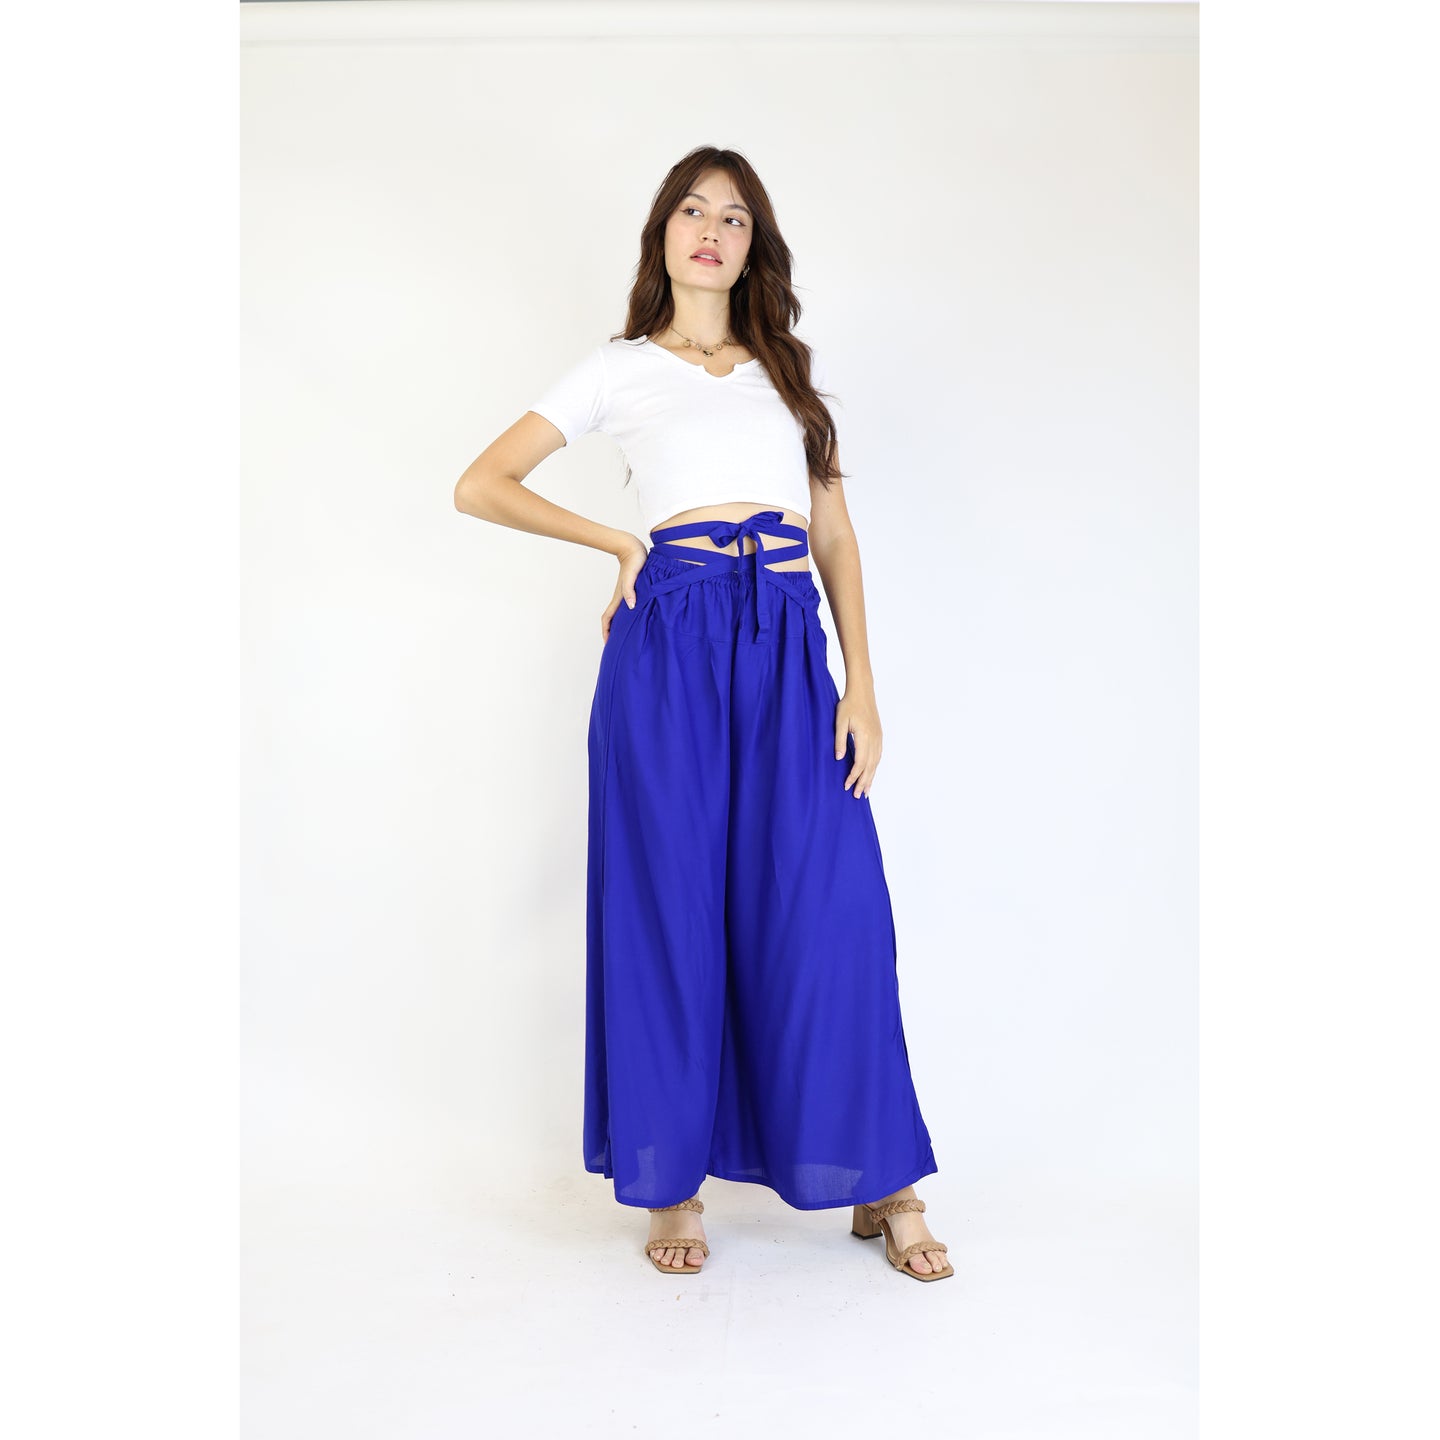 Solid Color Women Blooming Pants in Royal  Blue PP0204 020000 02